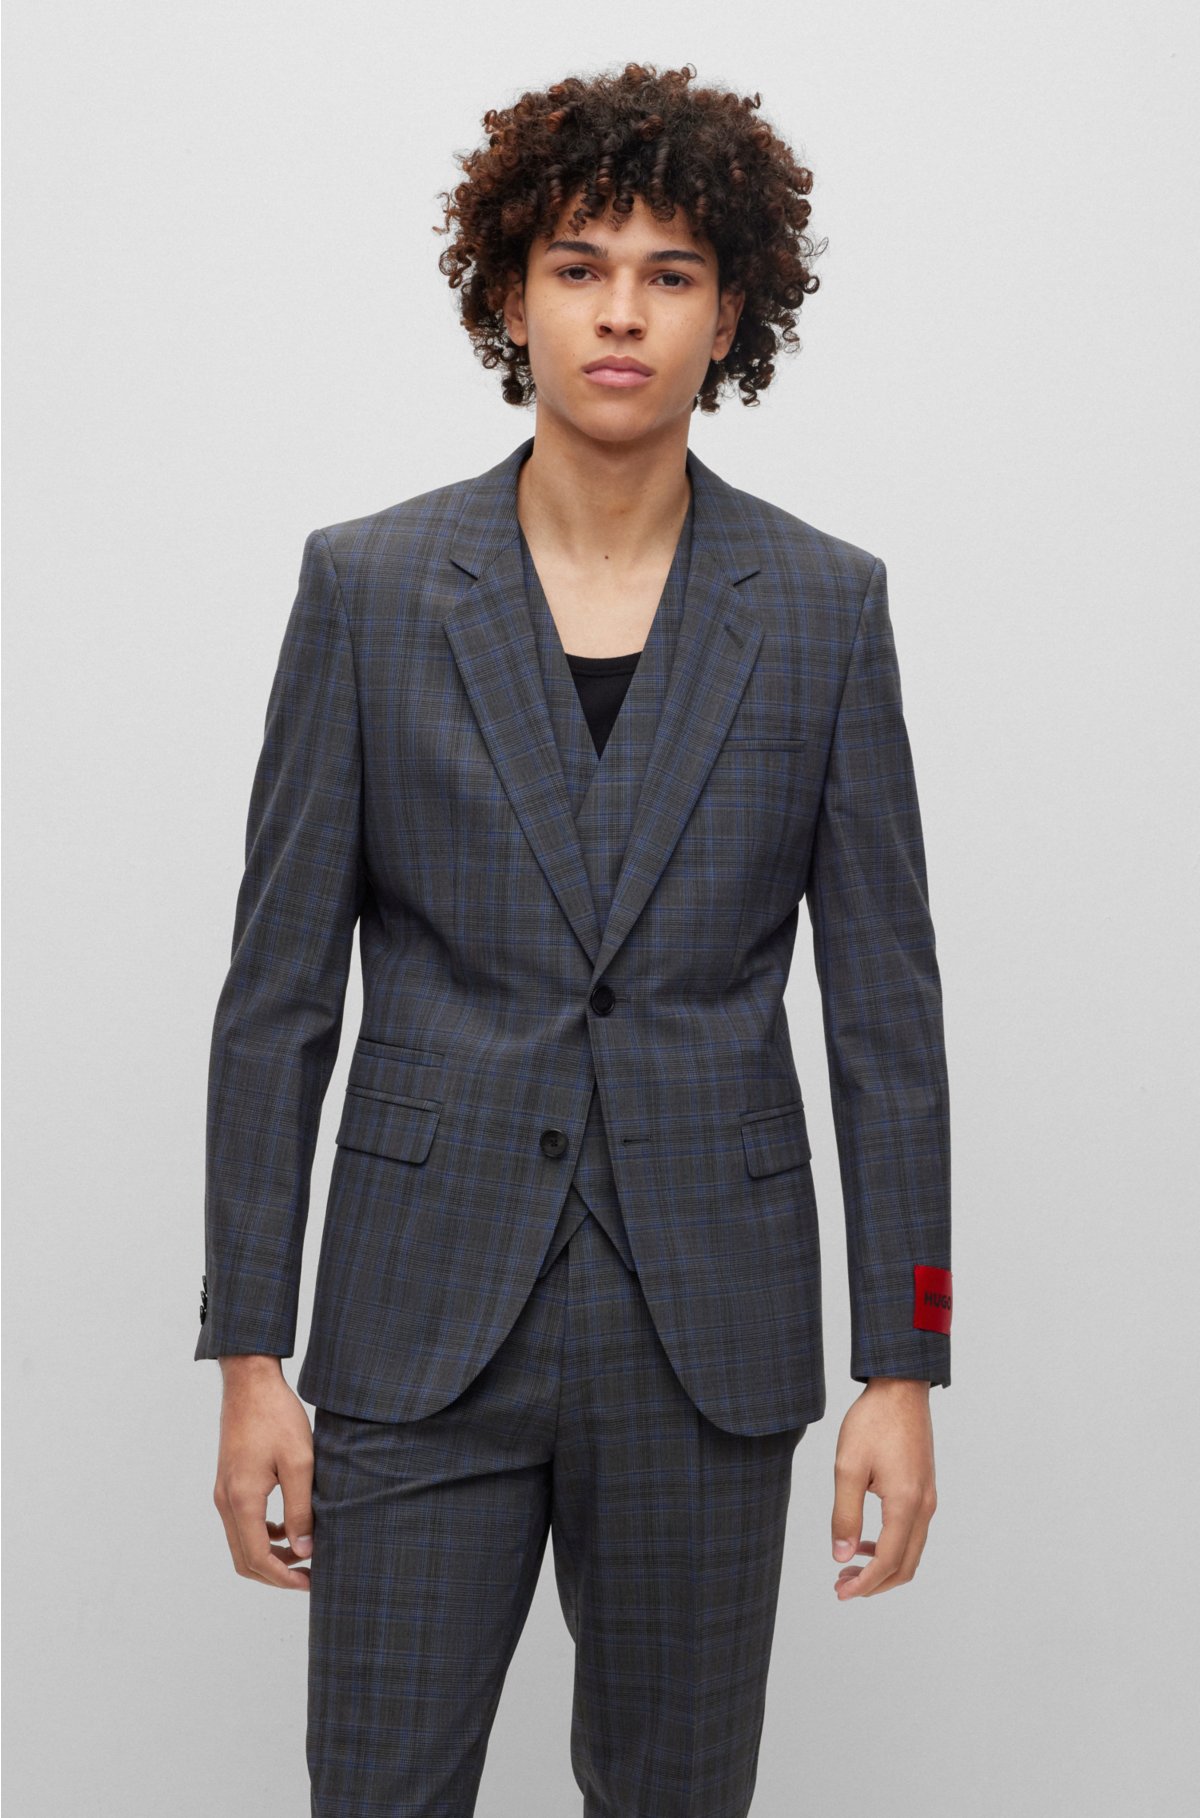 HUGO - Three-piece packable suit in an extra-slim fit